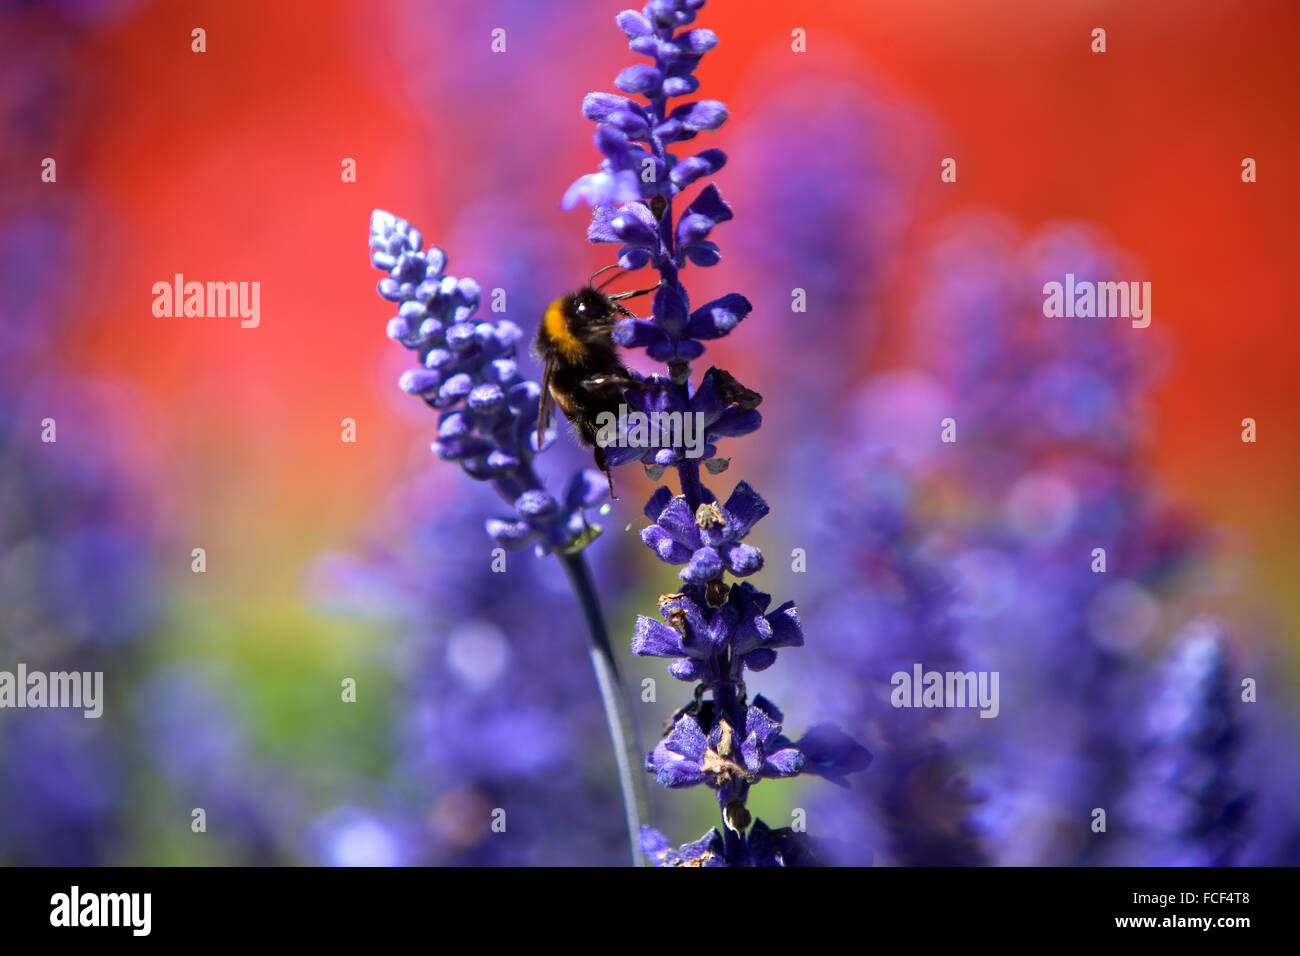 Closeup of a bumblebee in a field of purple salvia, summertime Stock Photo